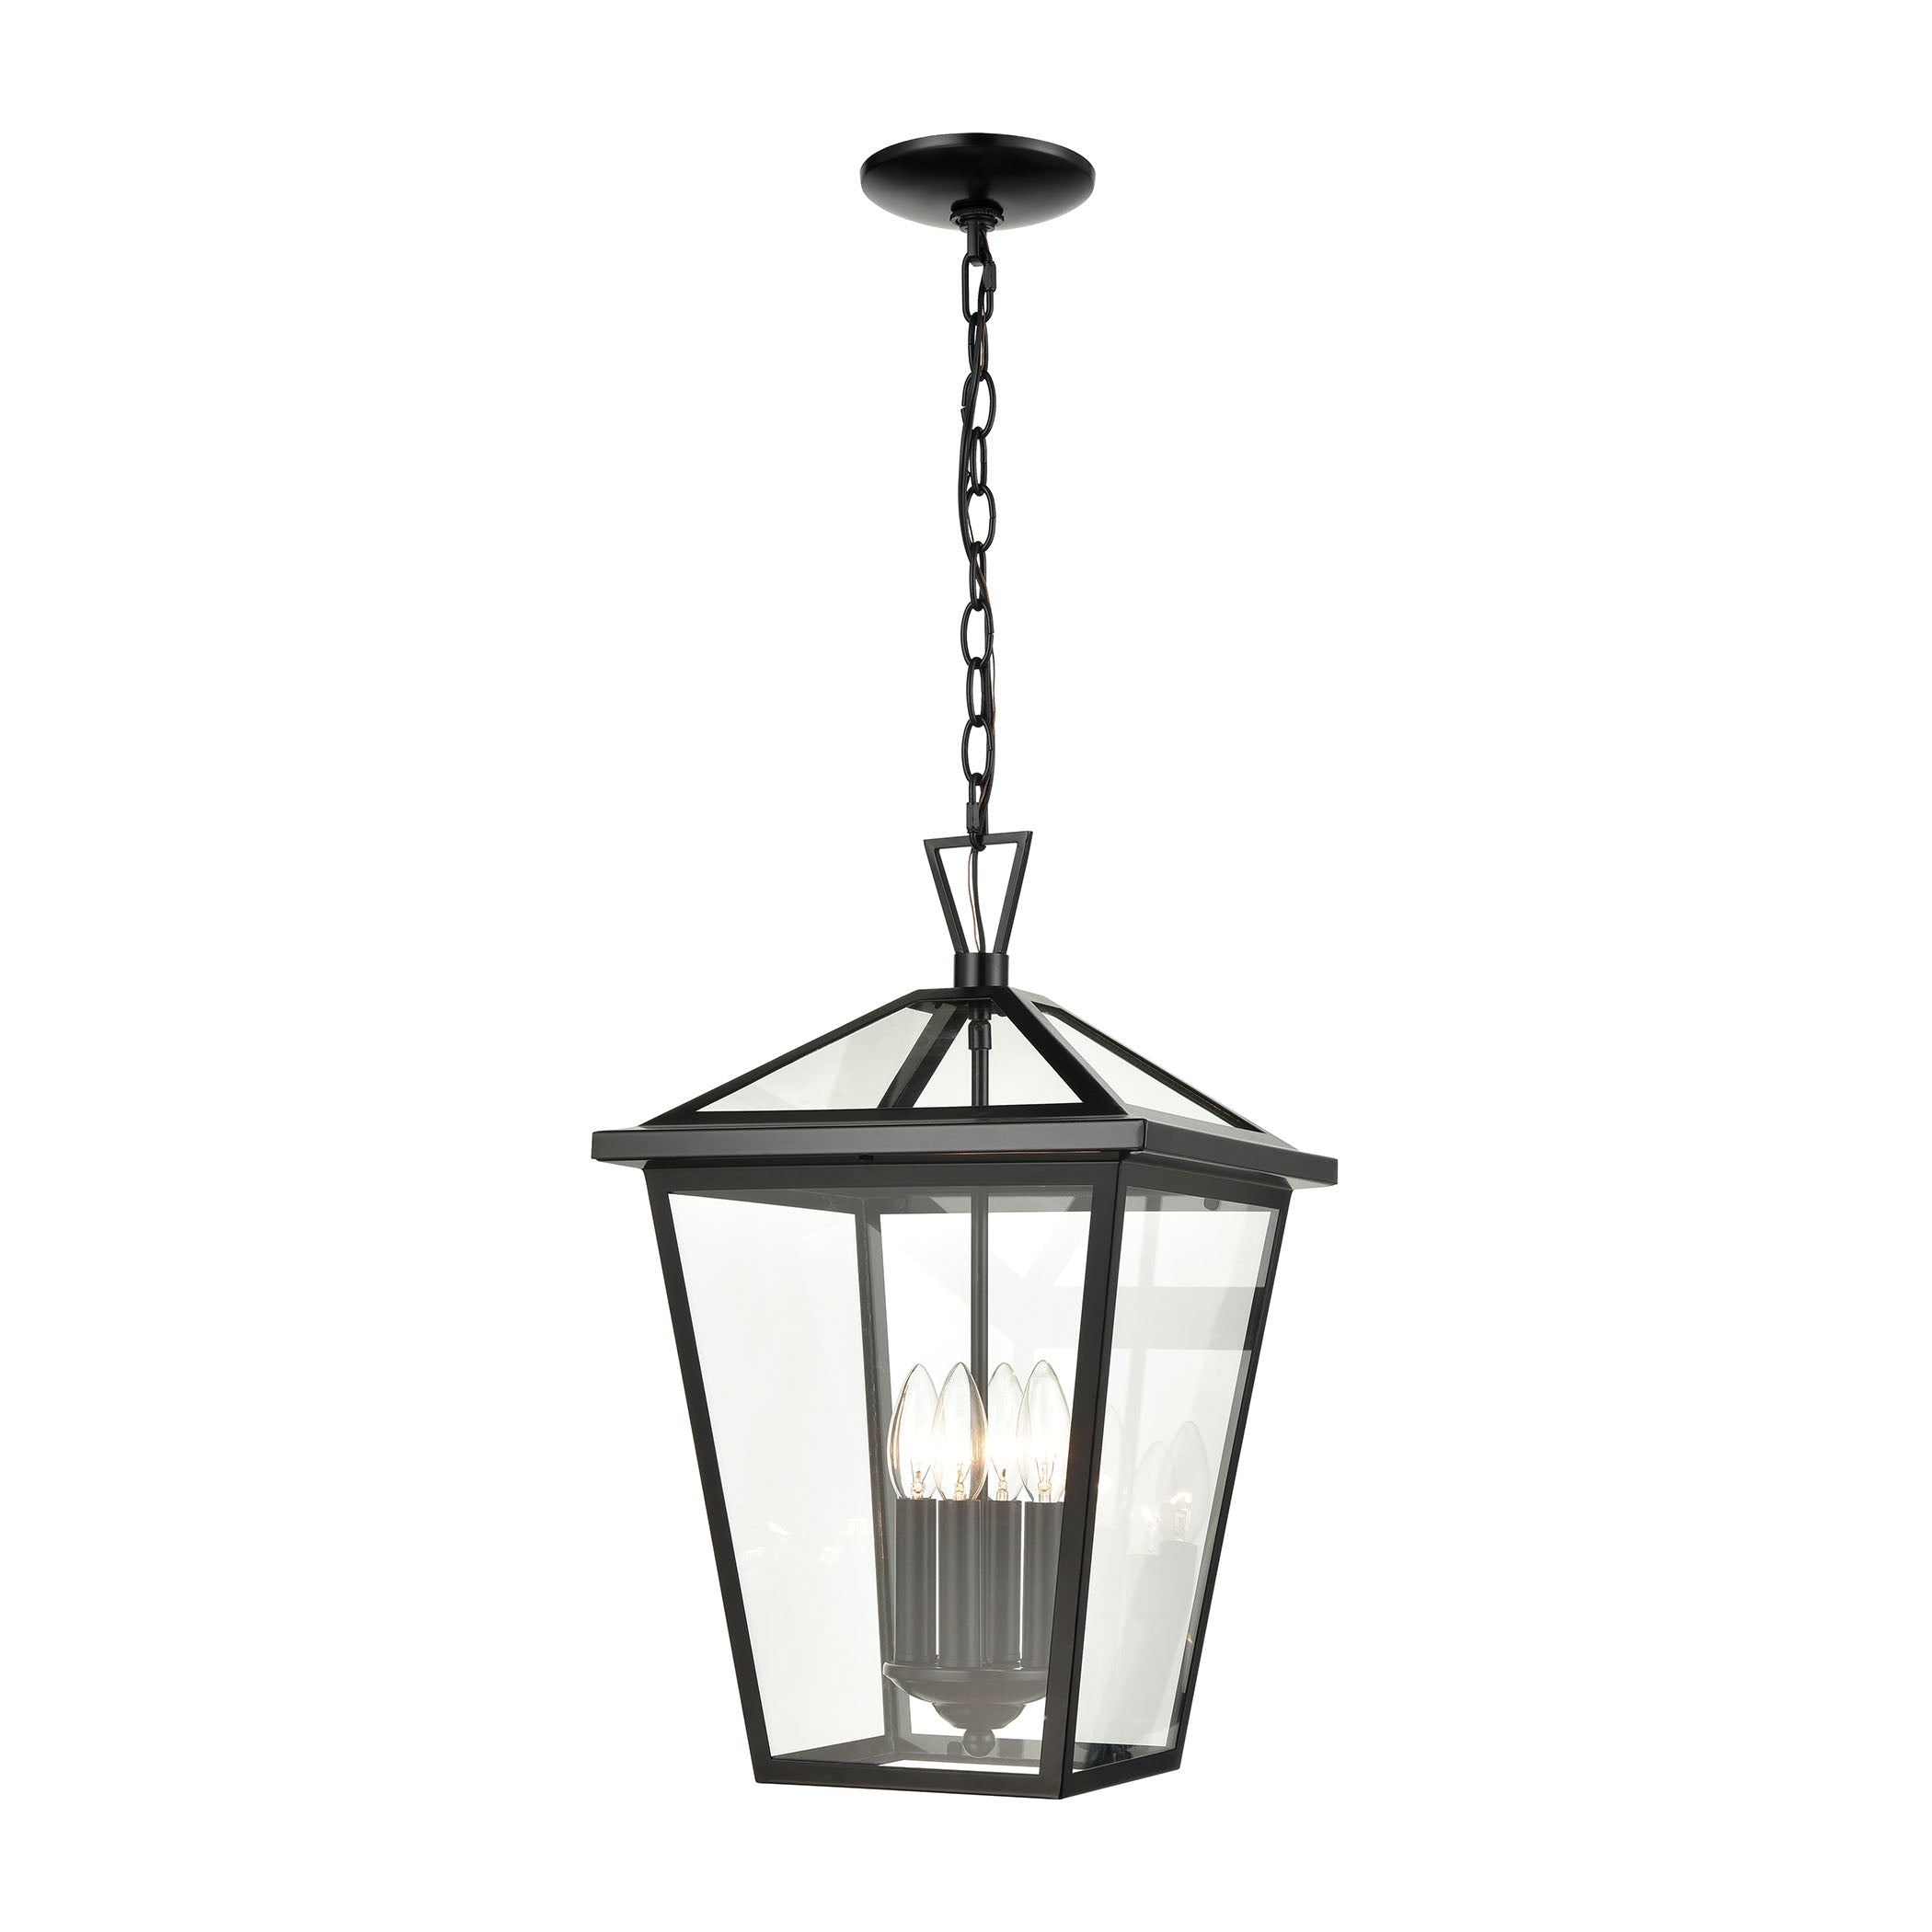 ELK Lighting 45474/4 Main Street 4-Light Outdoor Pendant in Black with Clear Glass Enclosure